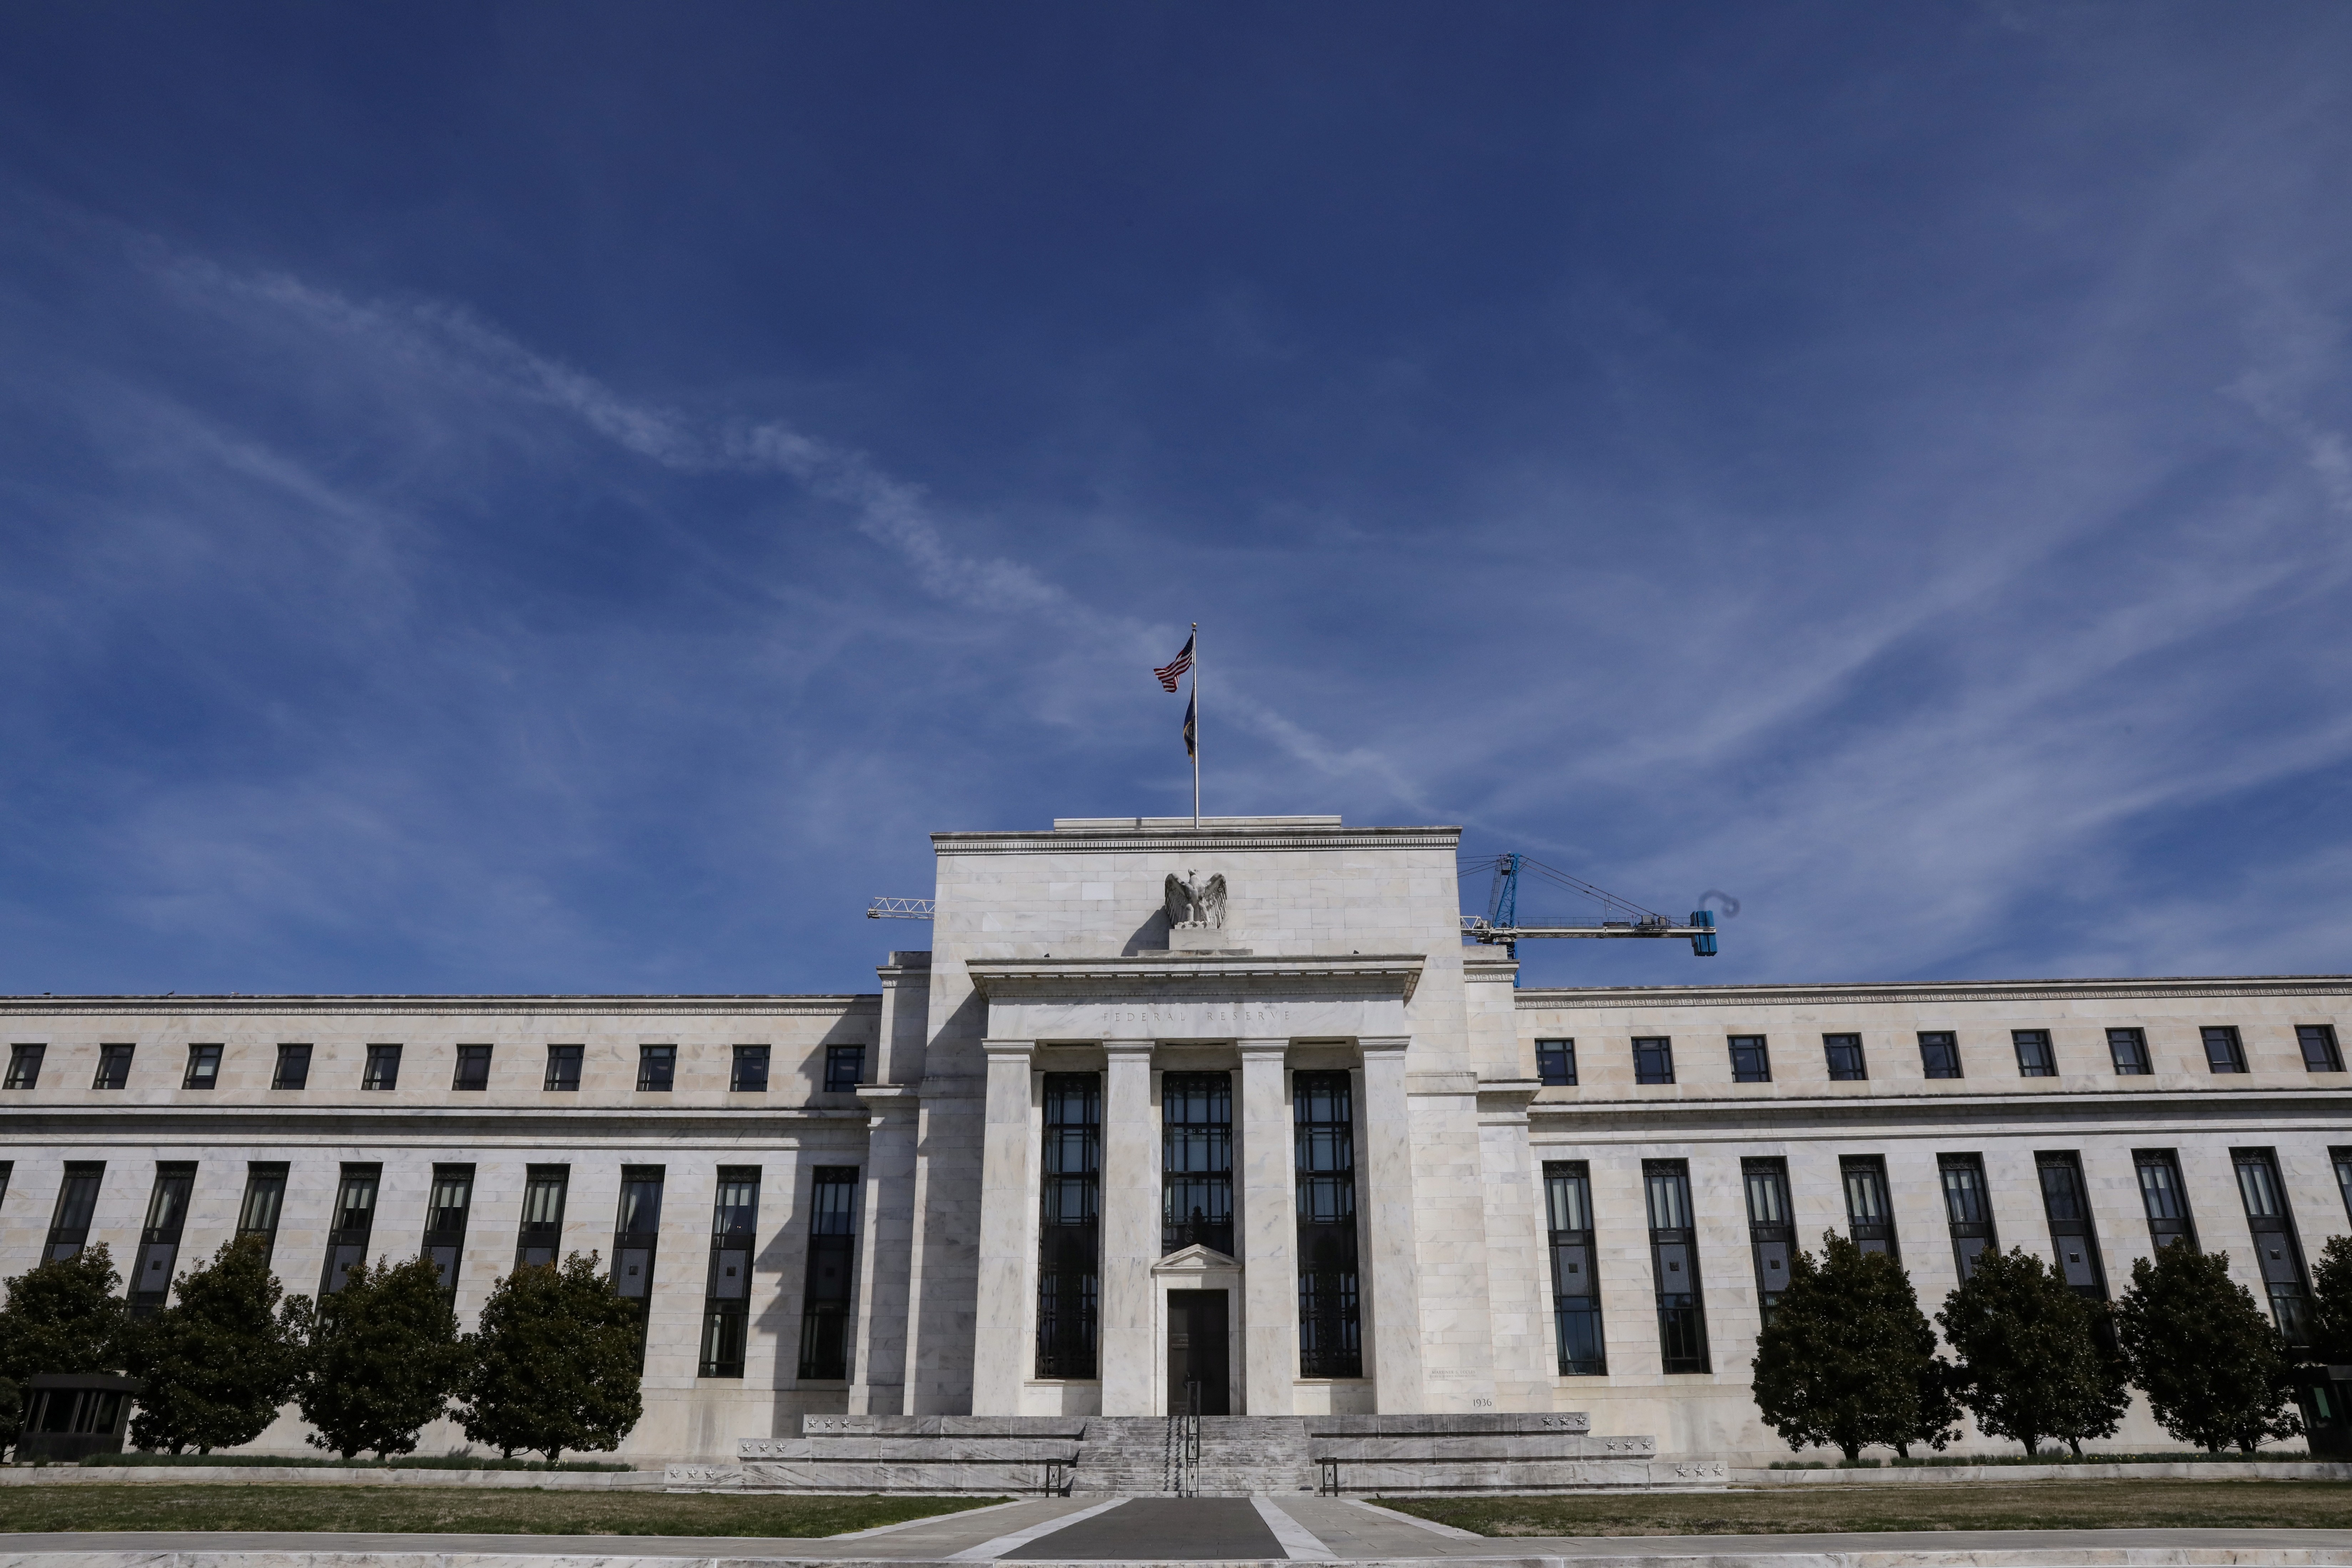 The Federal Reserve Board, whose building is seen here on Constitution Avenue in Washington, suggested that the unprecedented wave of quantitative easing undertaken by central banks around the world may have contributed to the flatter yield curve for Treasury bills. Photo: Reuters